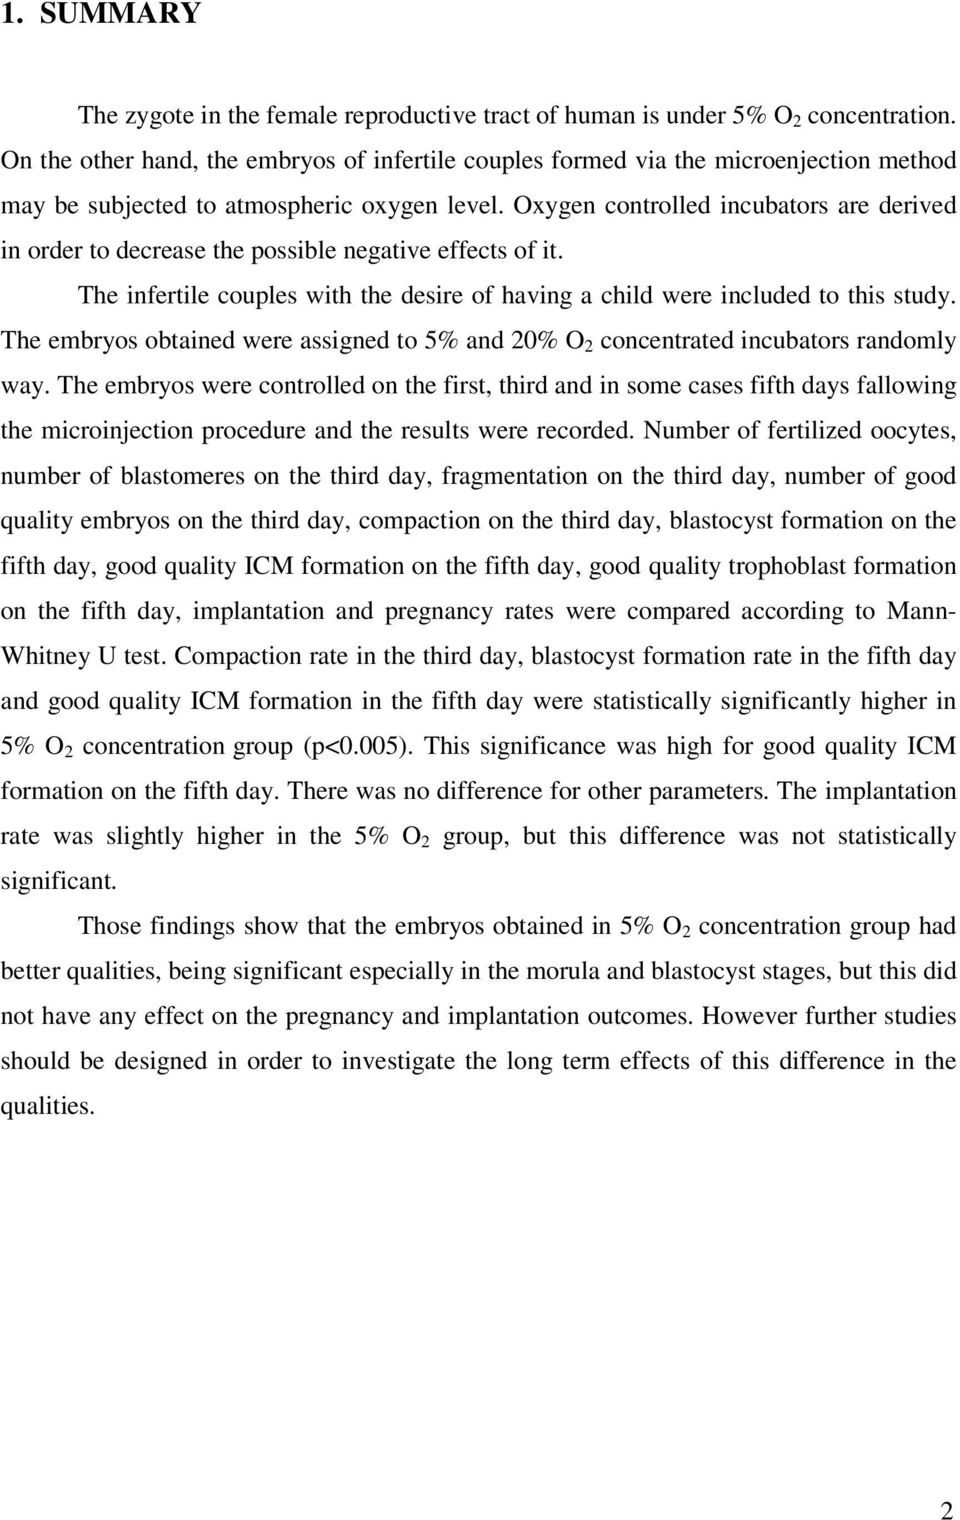 Oxygen controlled incubators are derived in order to decrease the possible negative effects of it. The infertile couples with the desire of having a child were included to this study.